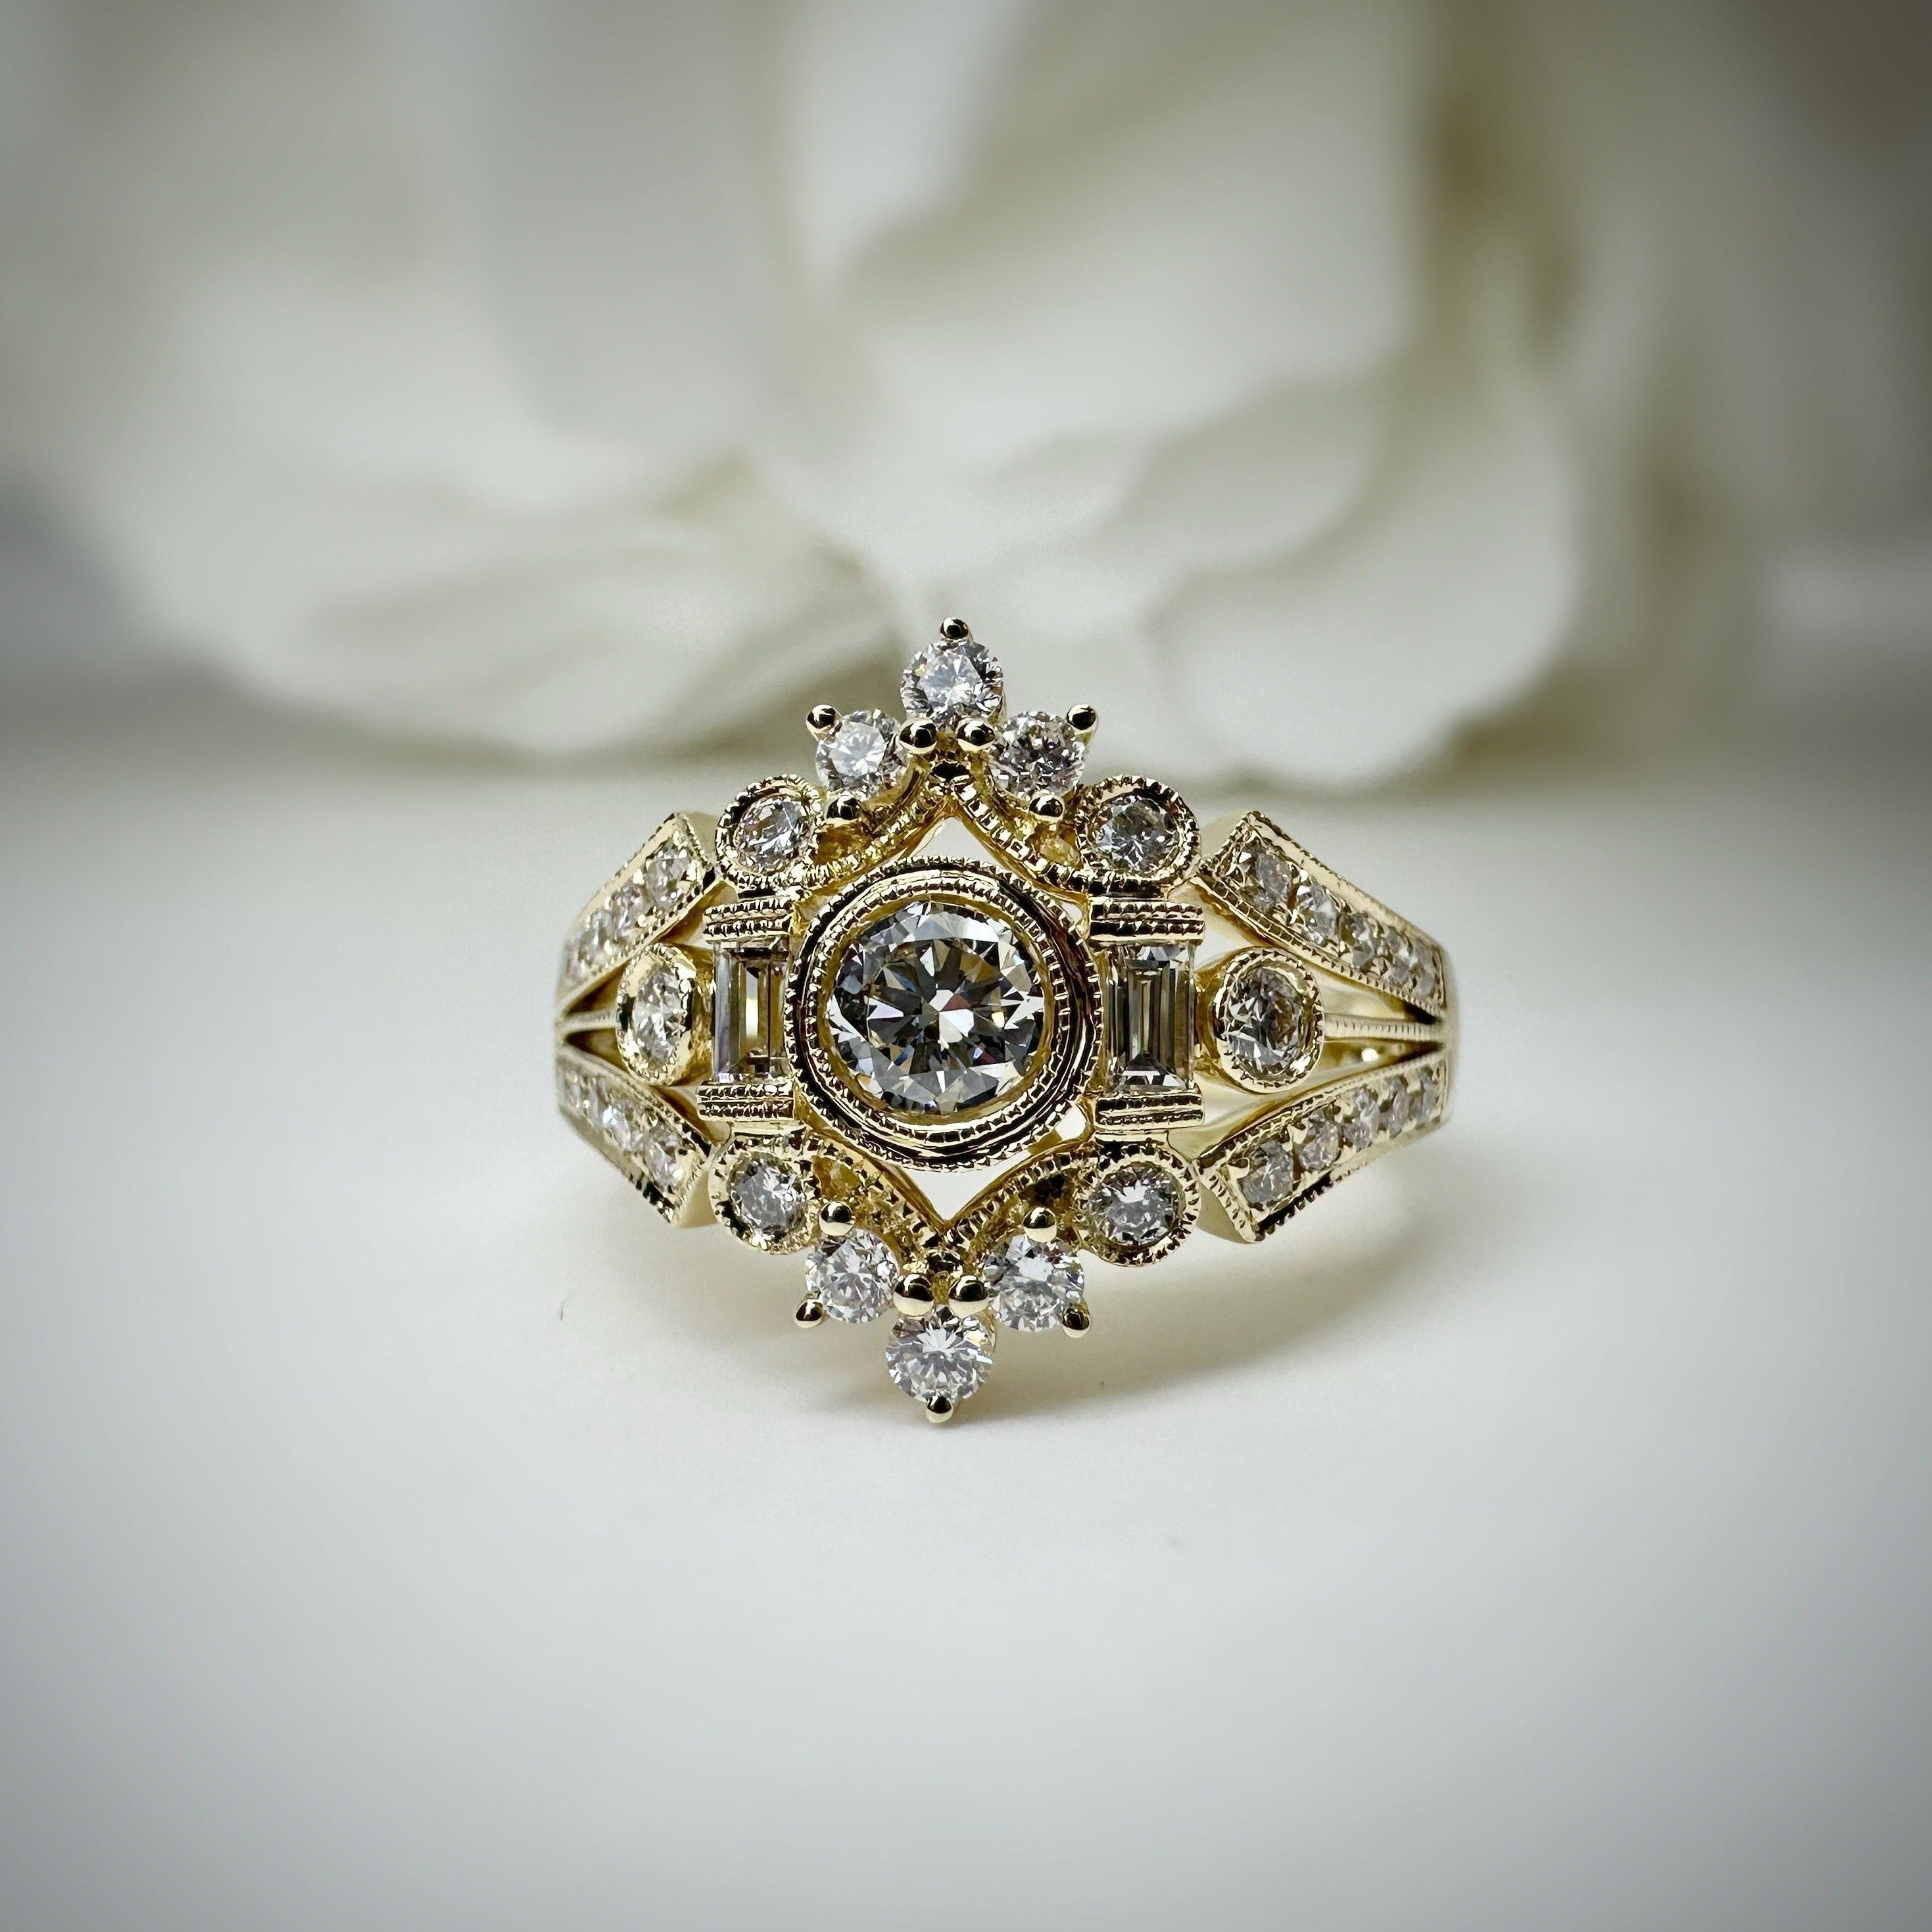 Vintage Inspired Round and Baguette Diamond Engagement Ring